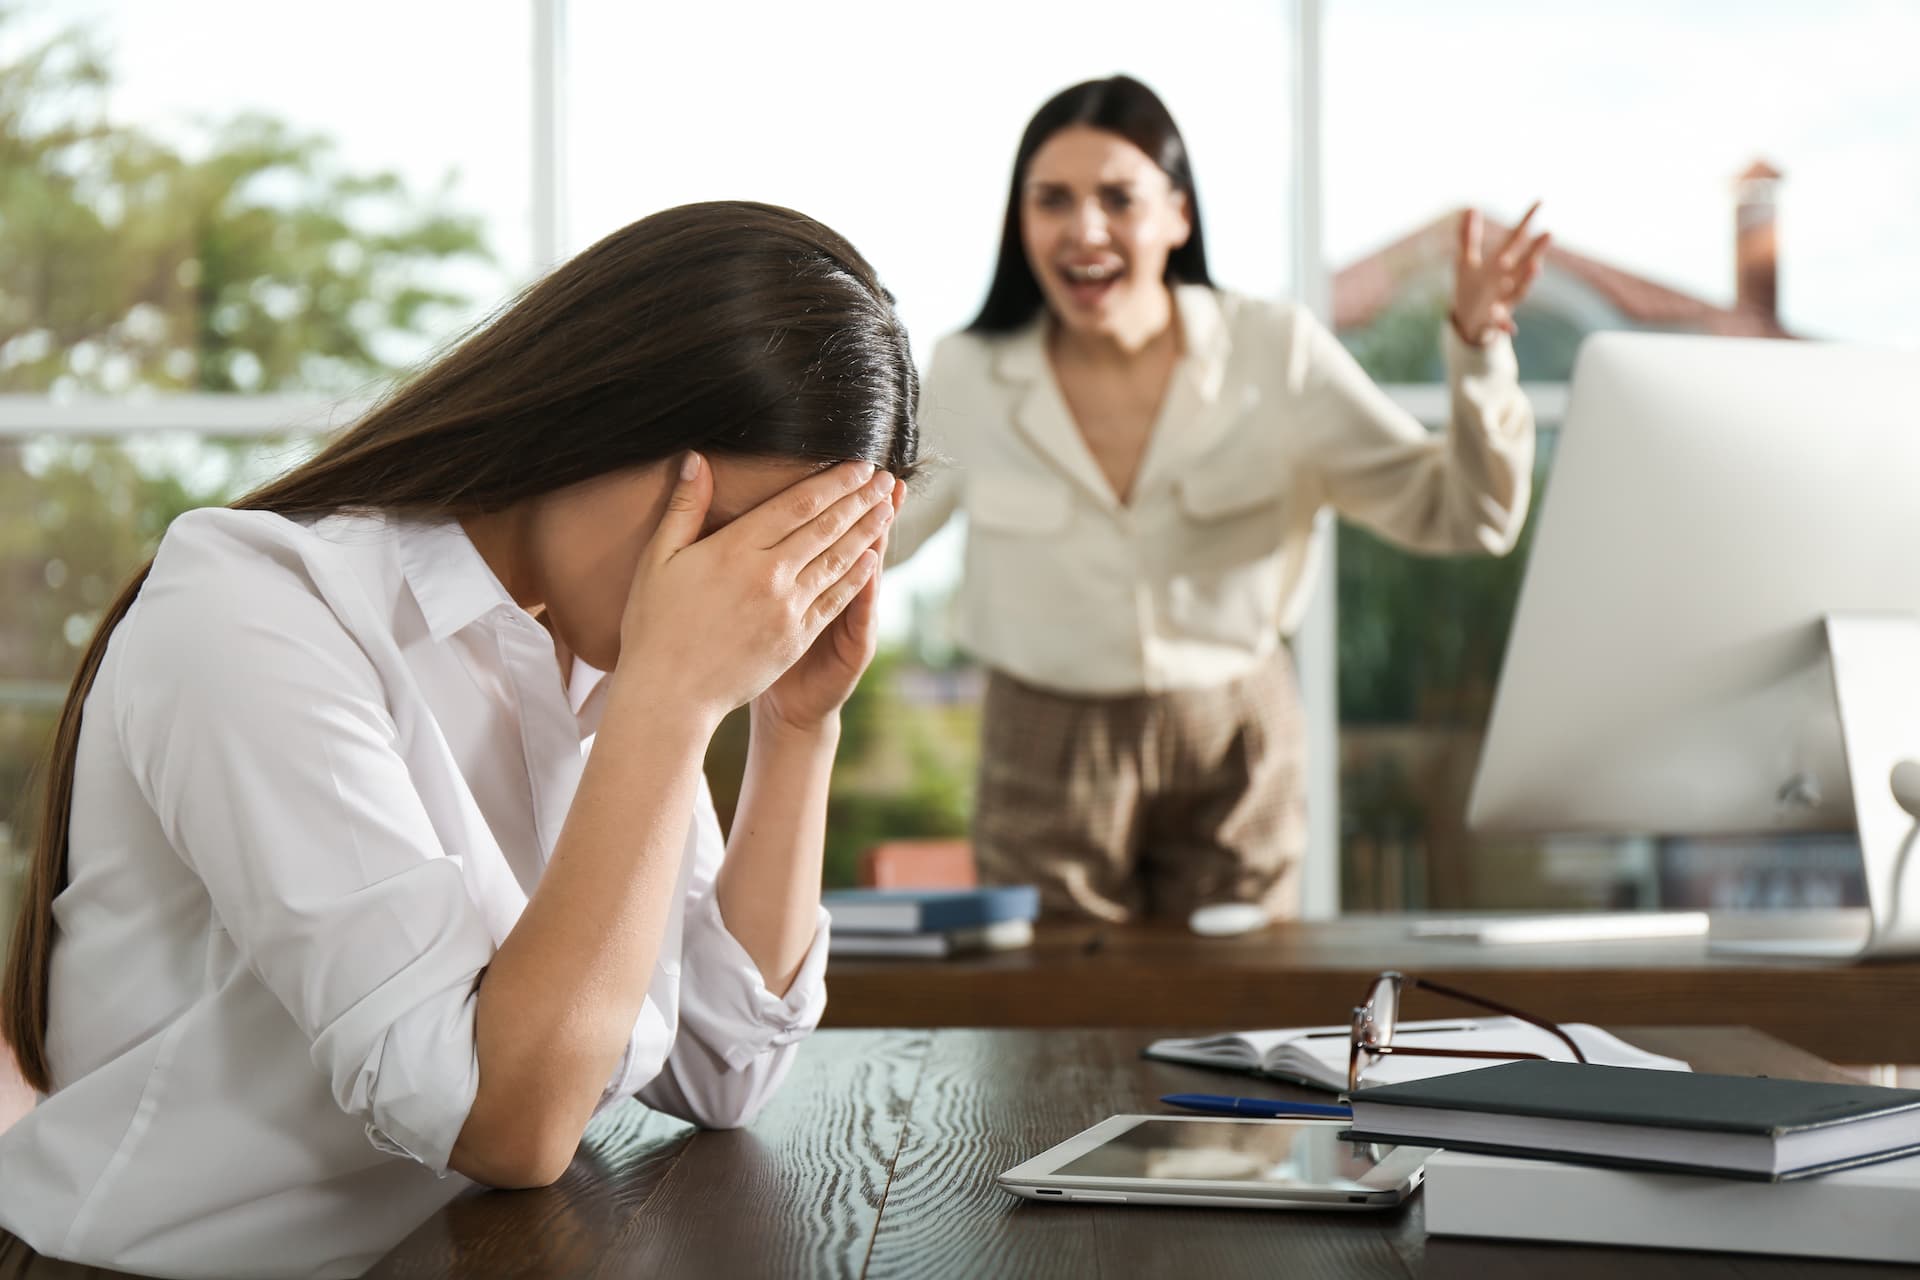 Woman in an office yelling at another woman who has her hands over her face, appearing to cry, showcasing a toxic work environment.